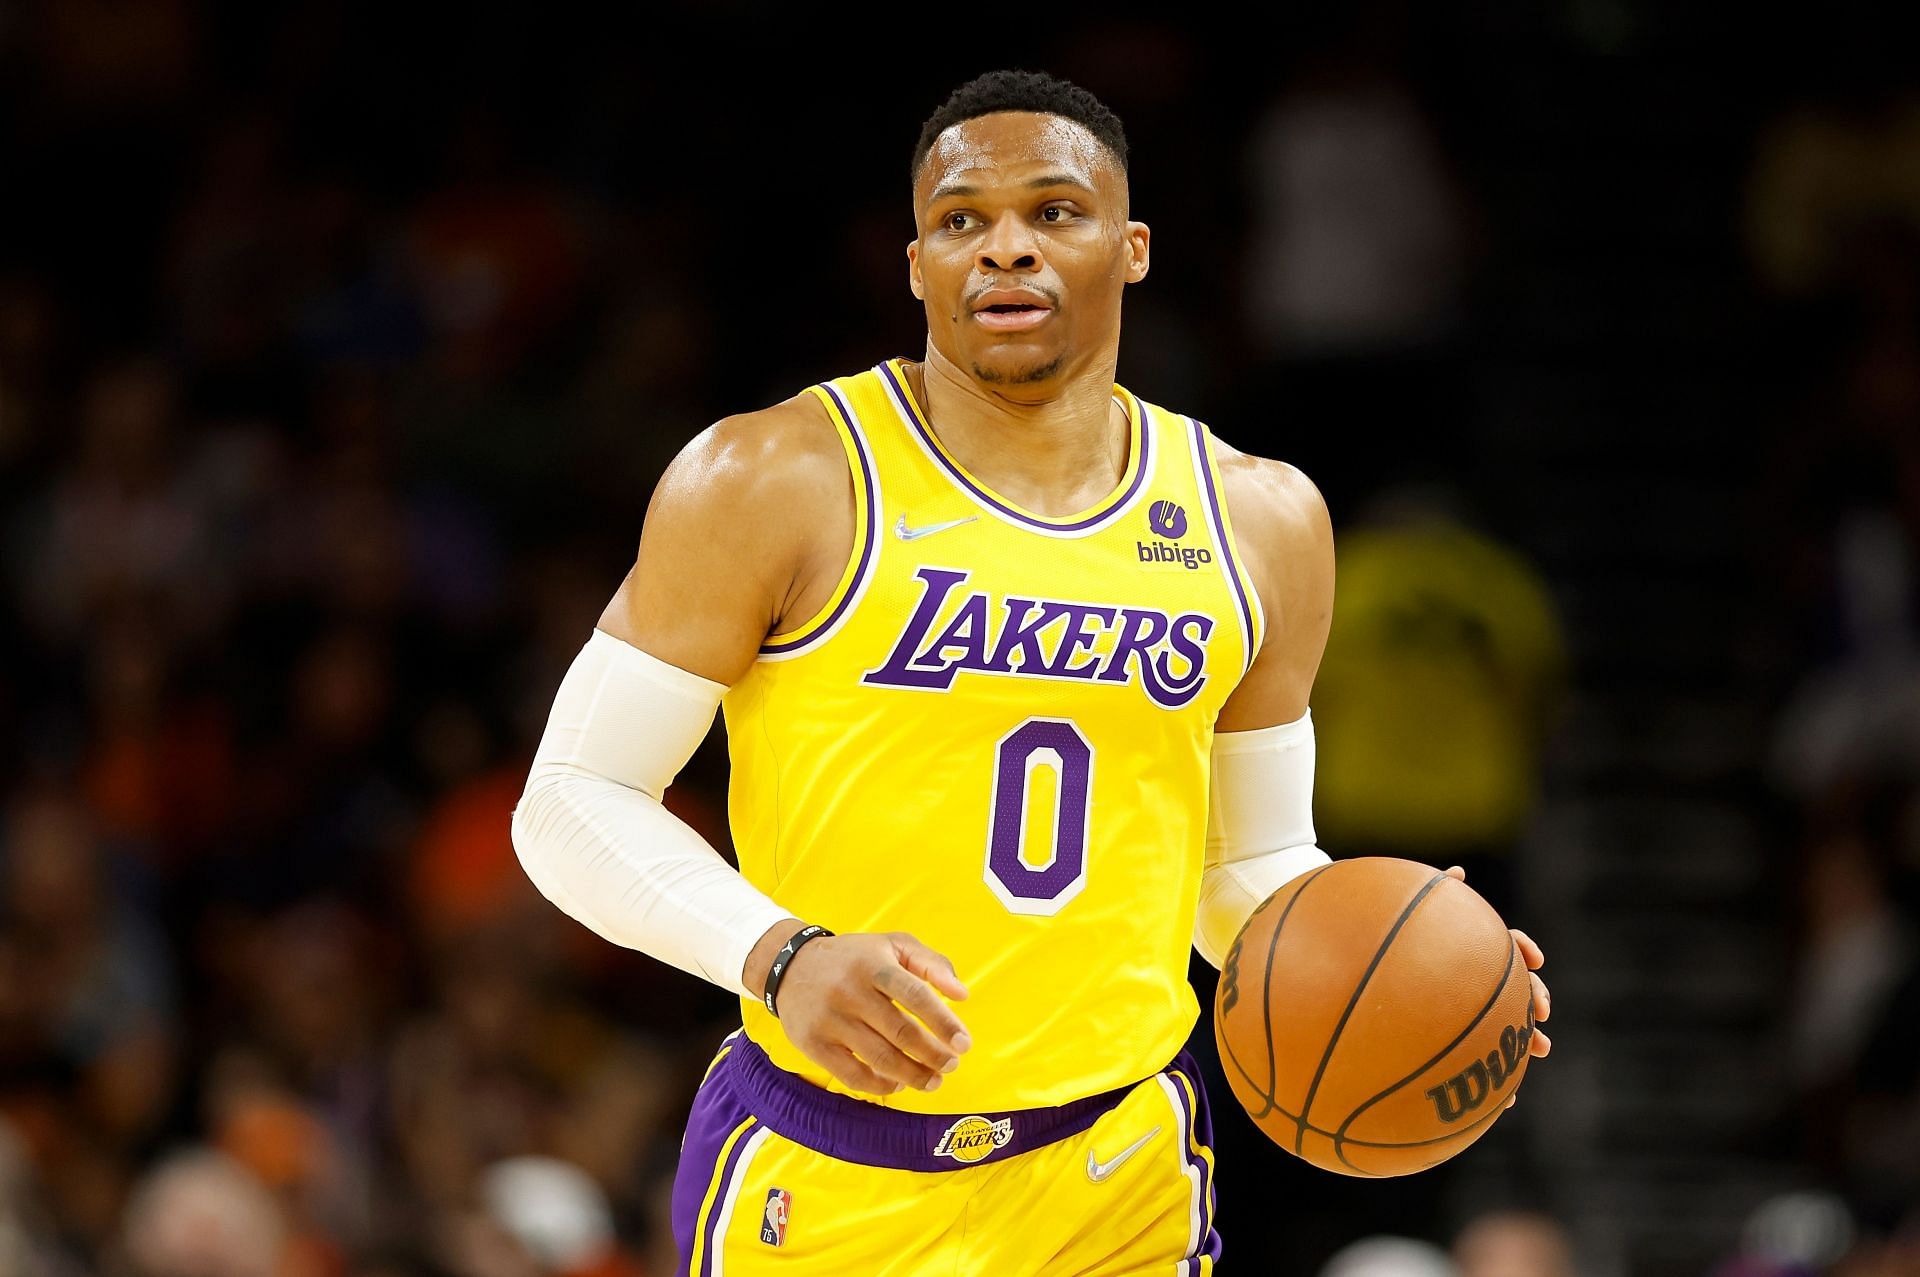 LA Lakers guard Russell Westbrook handles the ball.